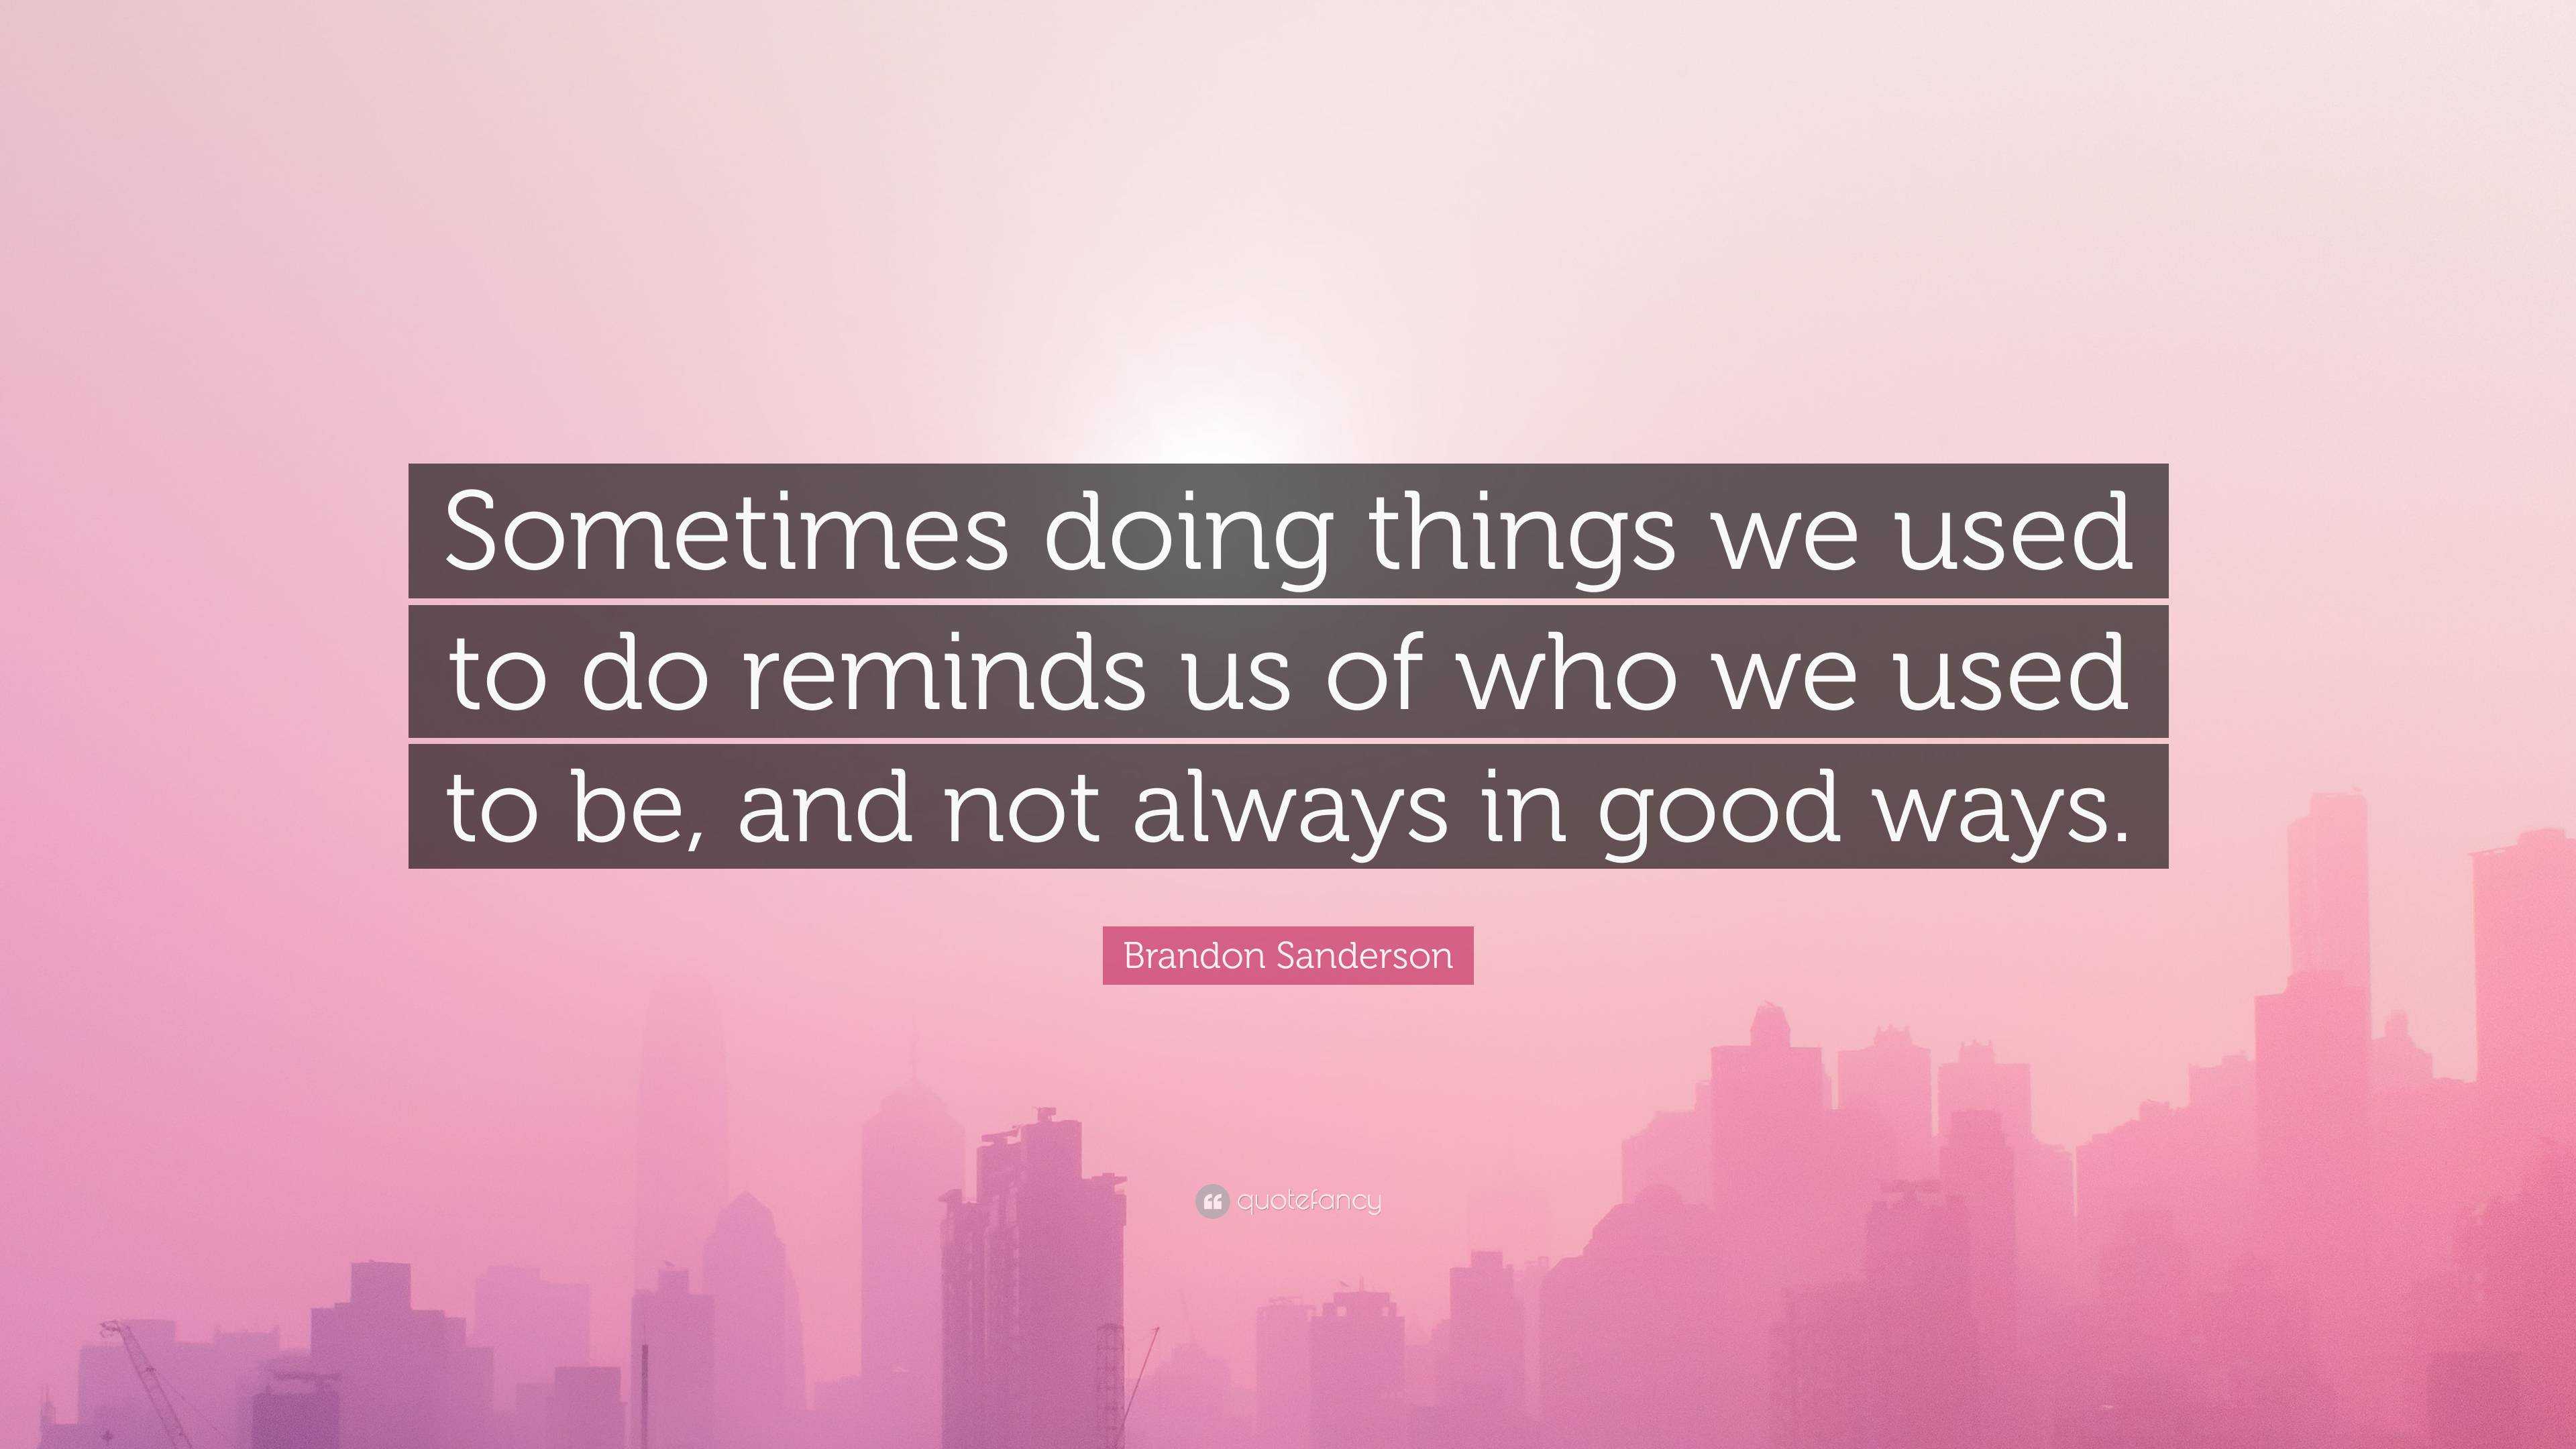 https://quotefancy.com/media/wallpaper/3840x2160/6582438-Brandon-Sanderson-Quote-Sometimes-doing-things-we-used-to-do.jpg